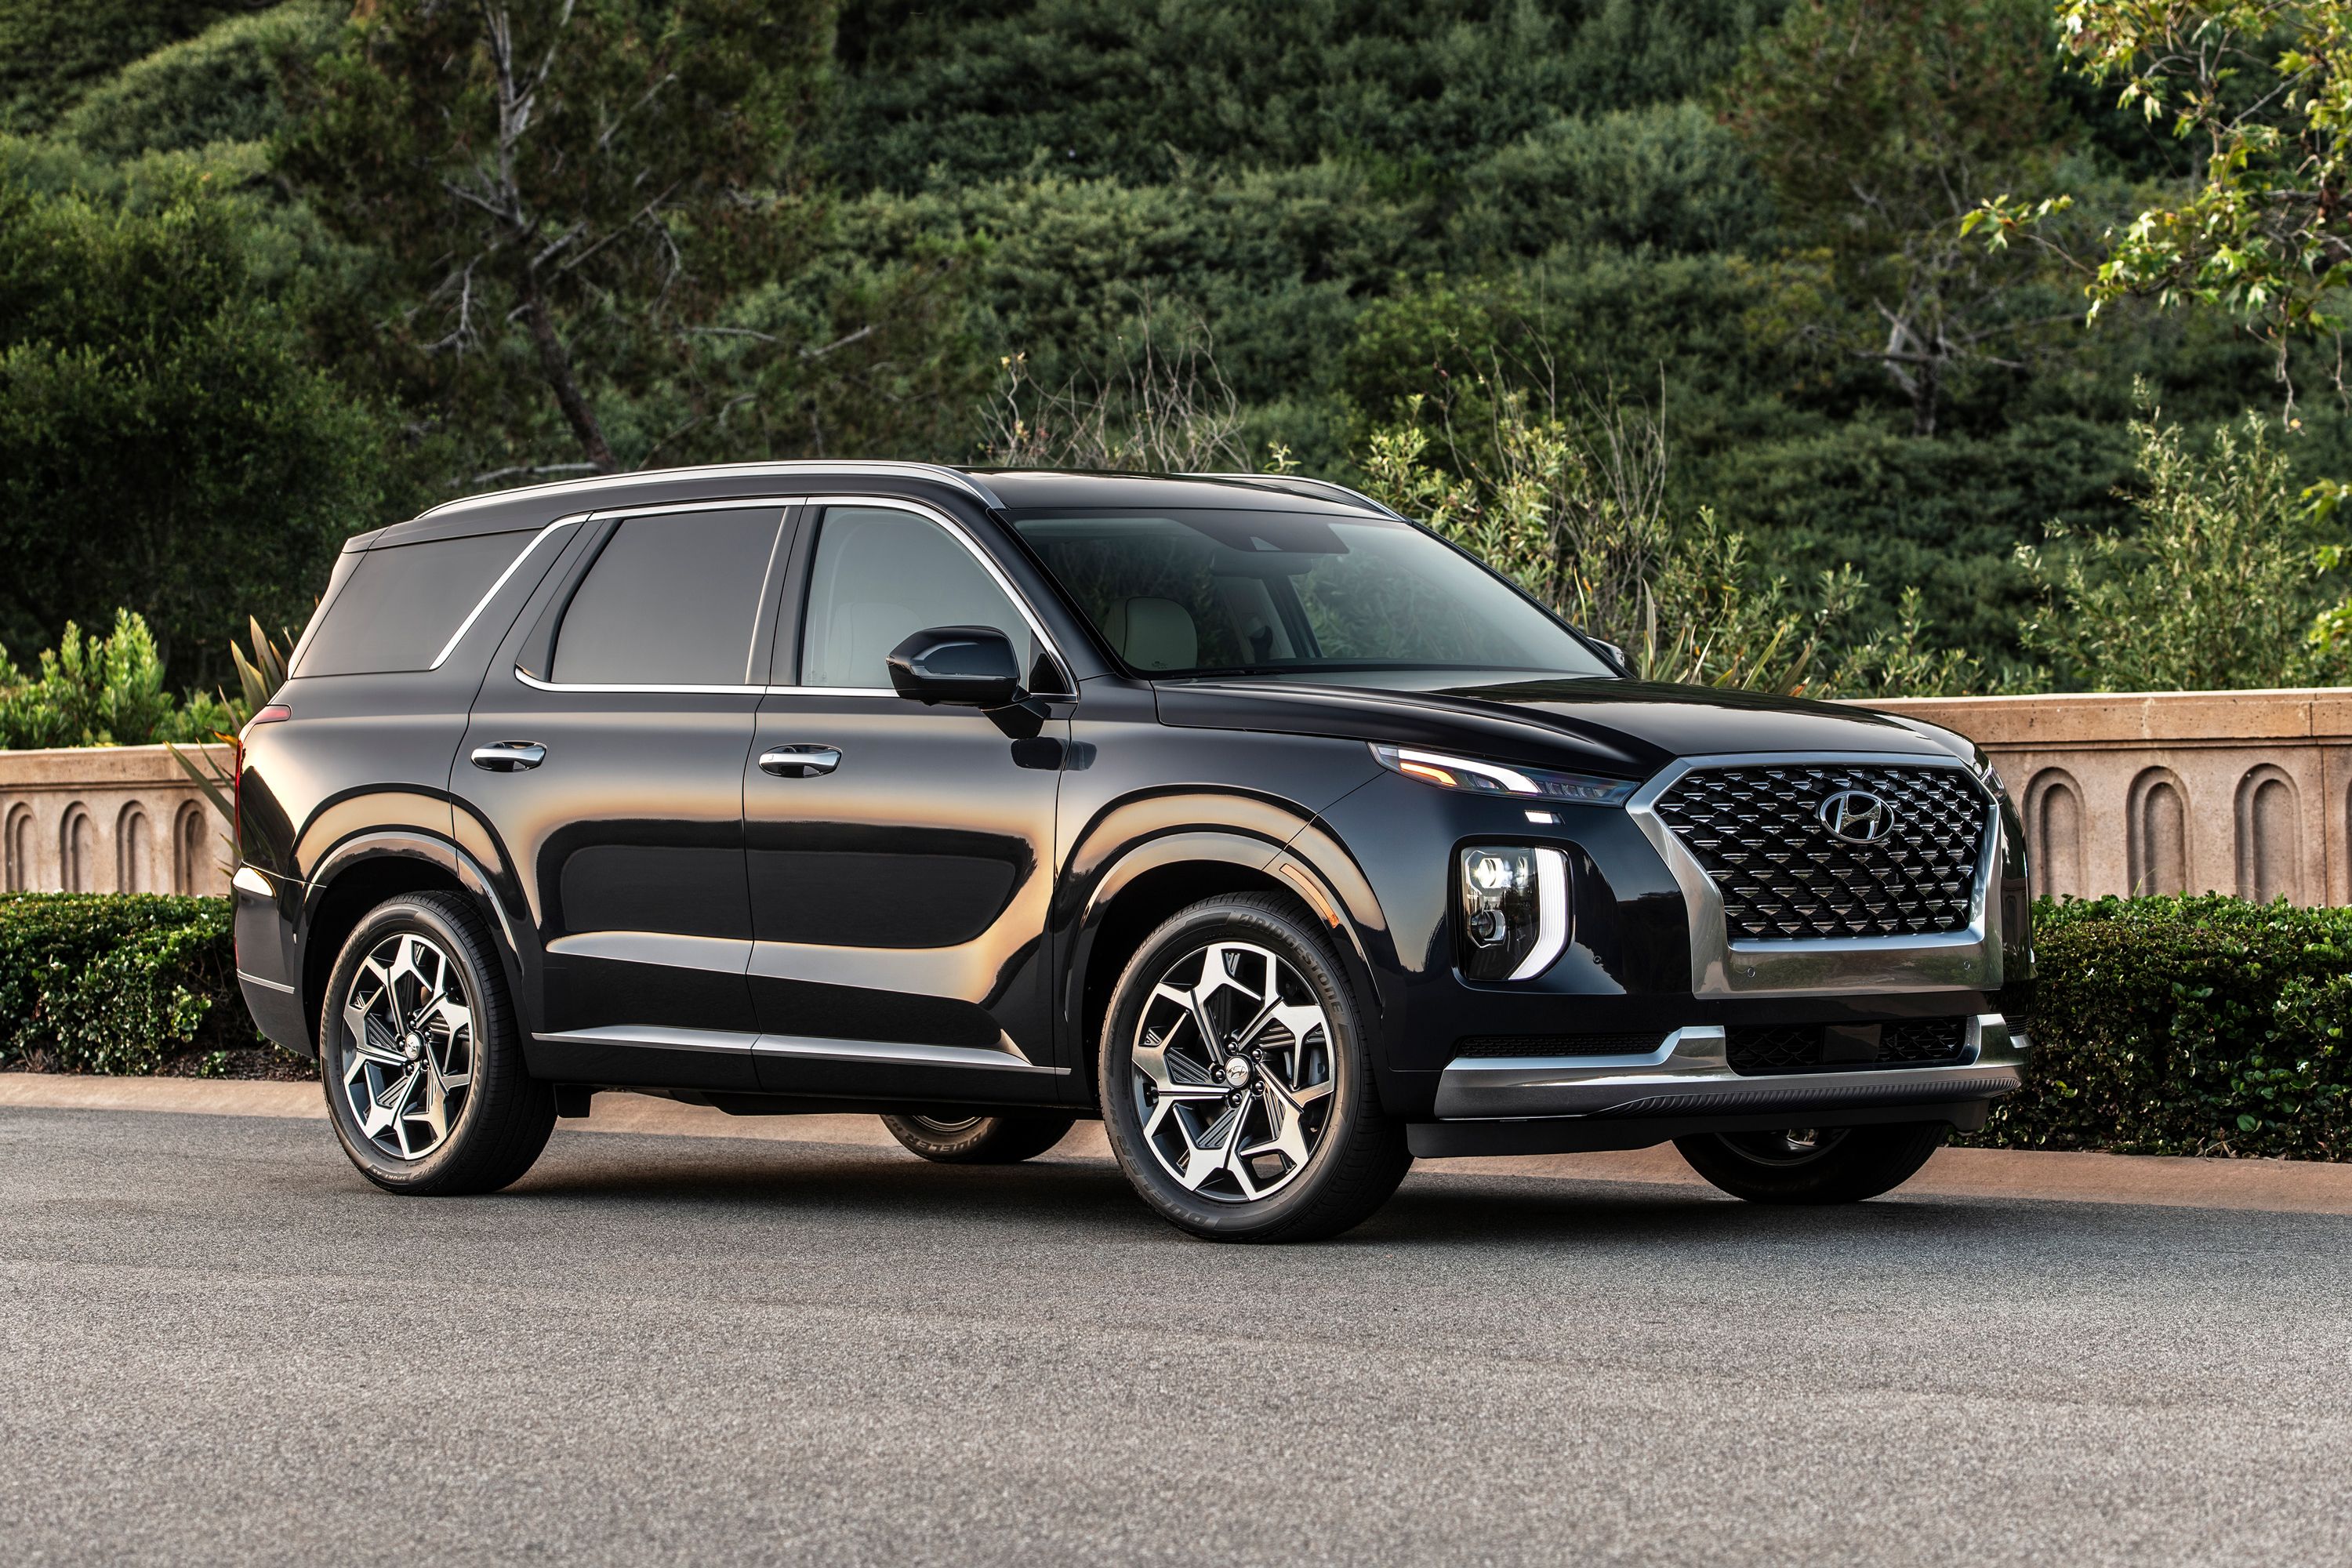 Best Suv Warranty 2021 2021 Hyundai Palisade Review, Pricing, and Specs